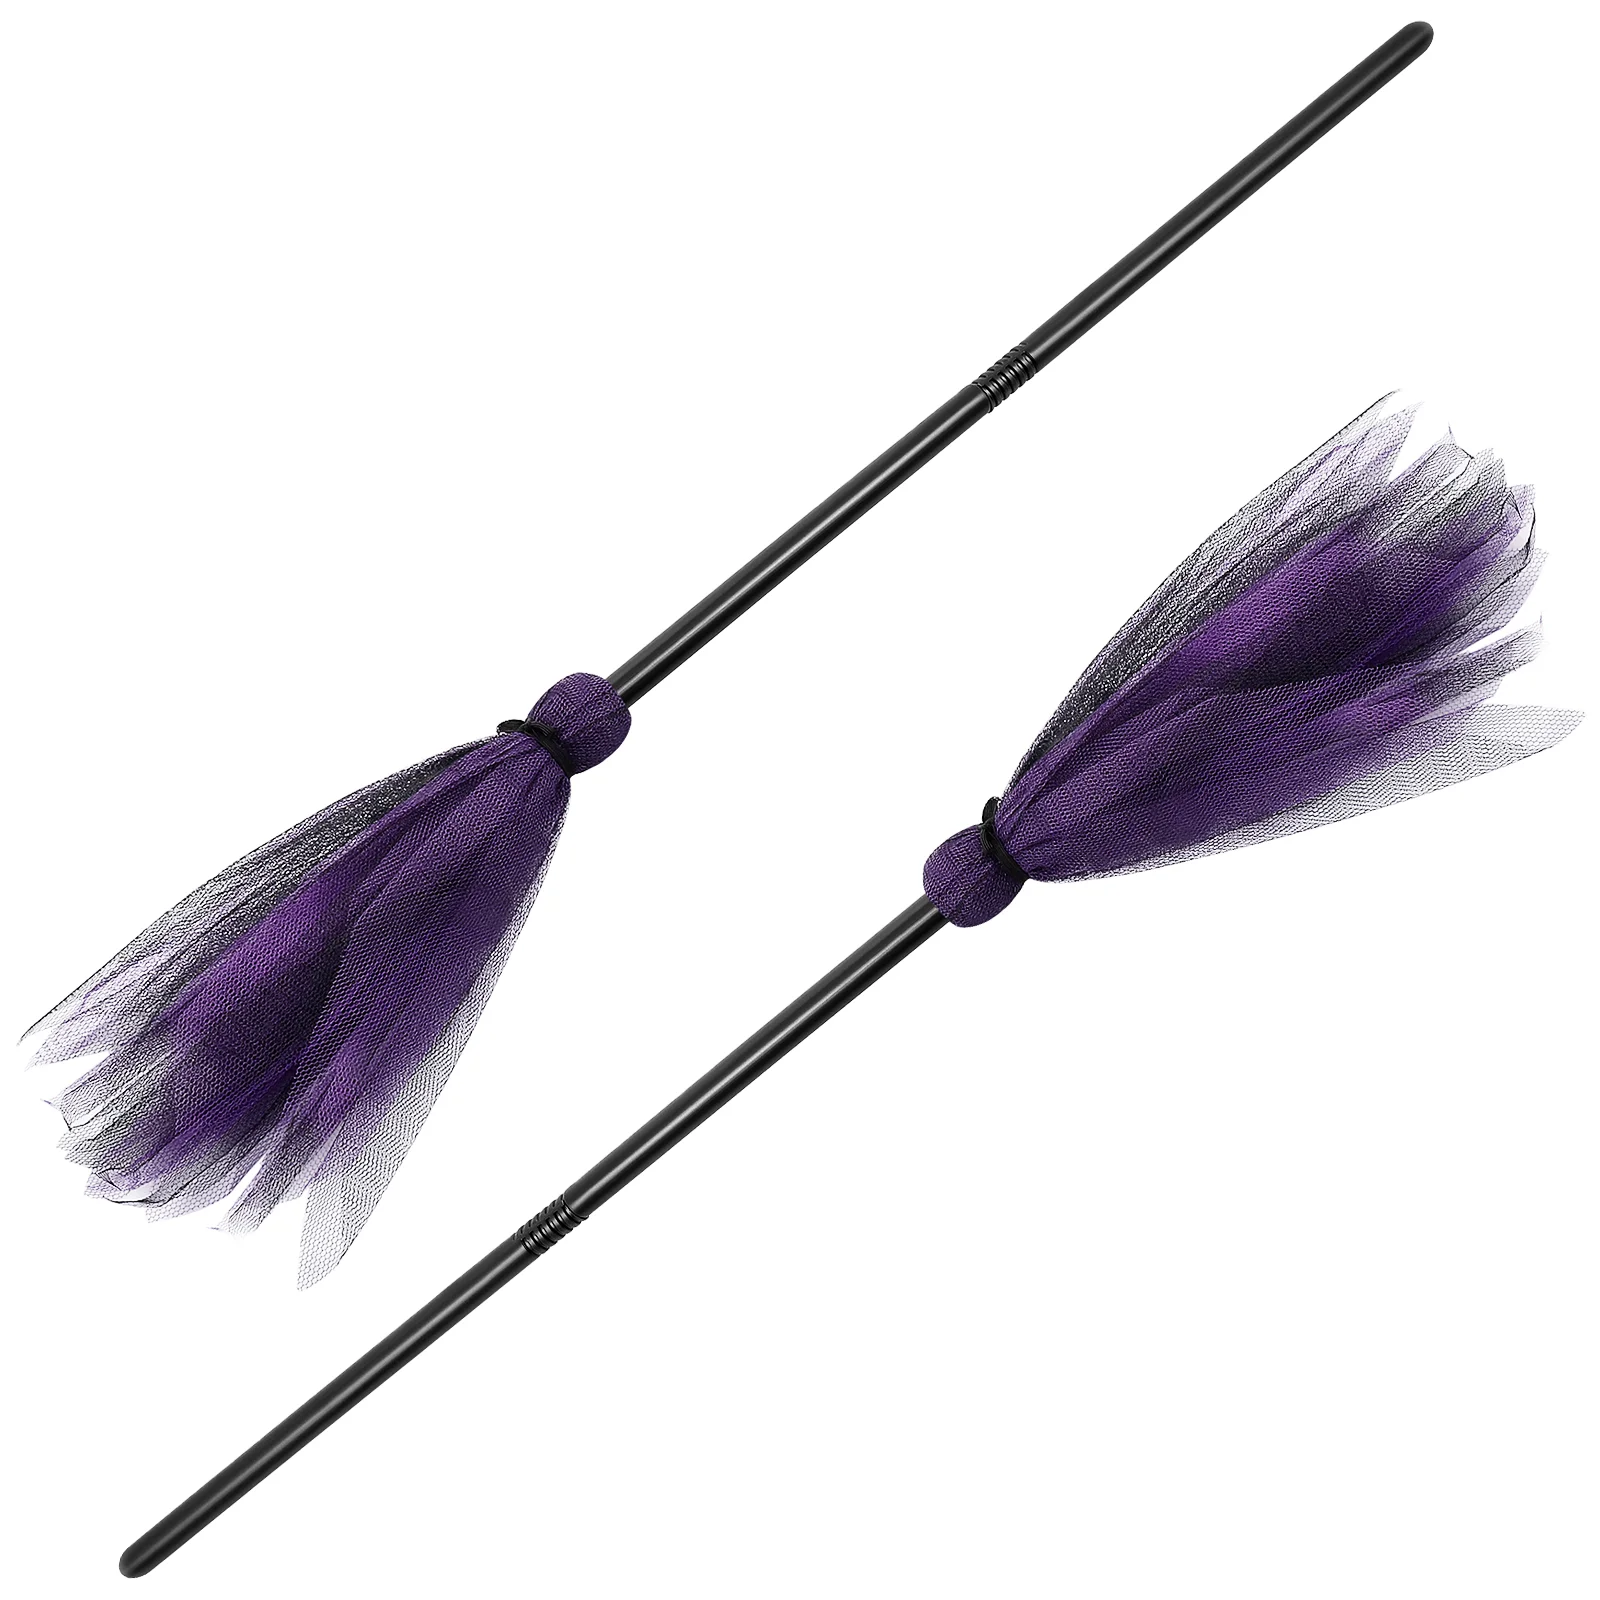 

IMIKEYA 2pcs Halloween Witches Broom Costume Decorative Props Masquerade Show Dress Up Miracle Broom Witch Broom for Feastival